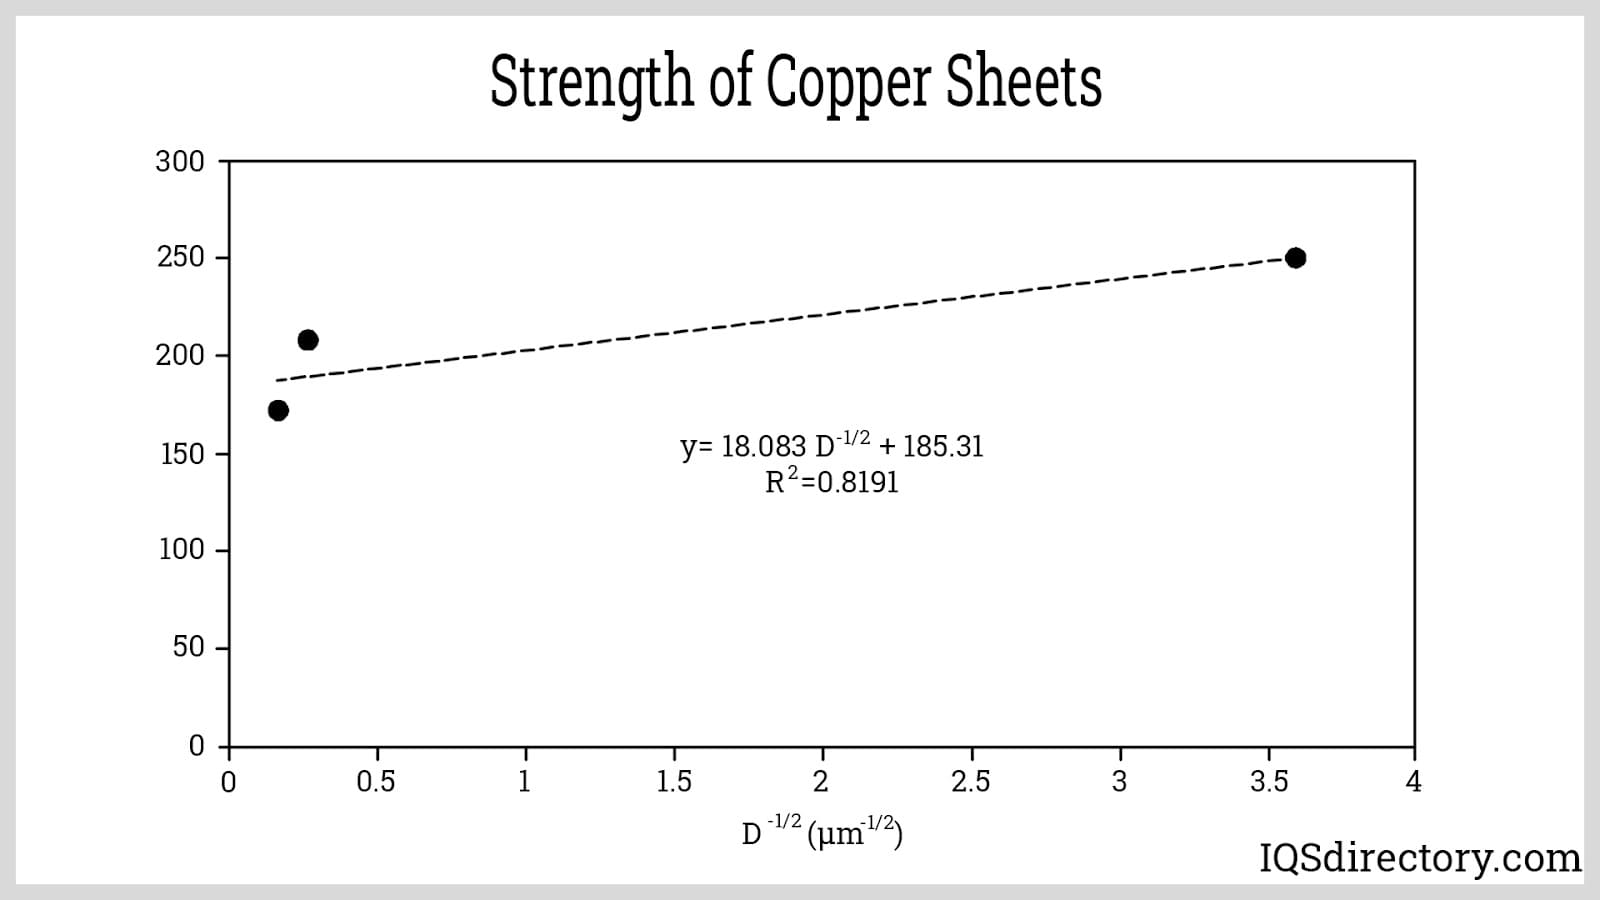 Strength of Copper Sheets